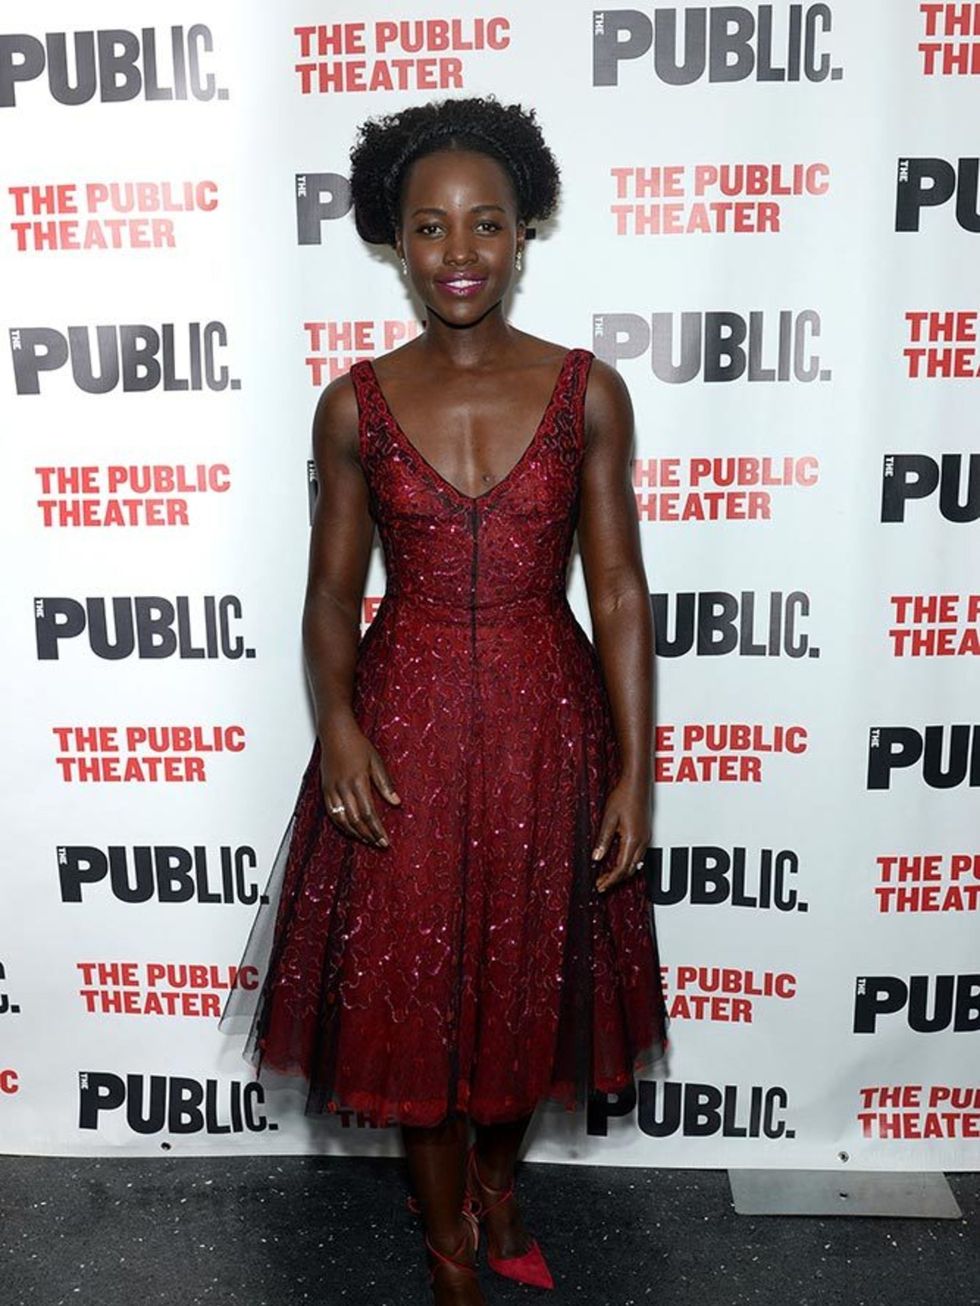 Lupita Nyong'o attends the opening night of Eclipsed in New York, November 2015.